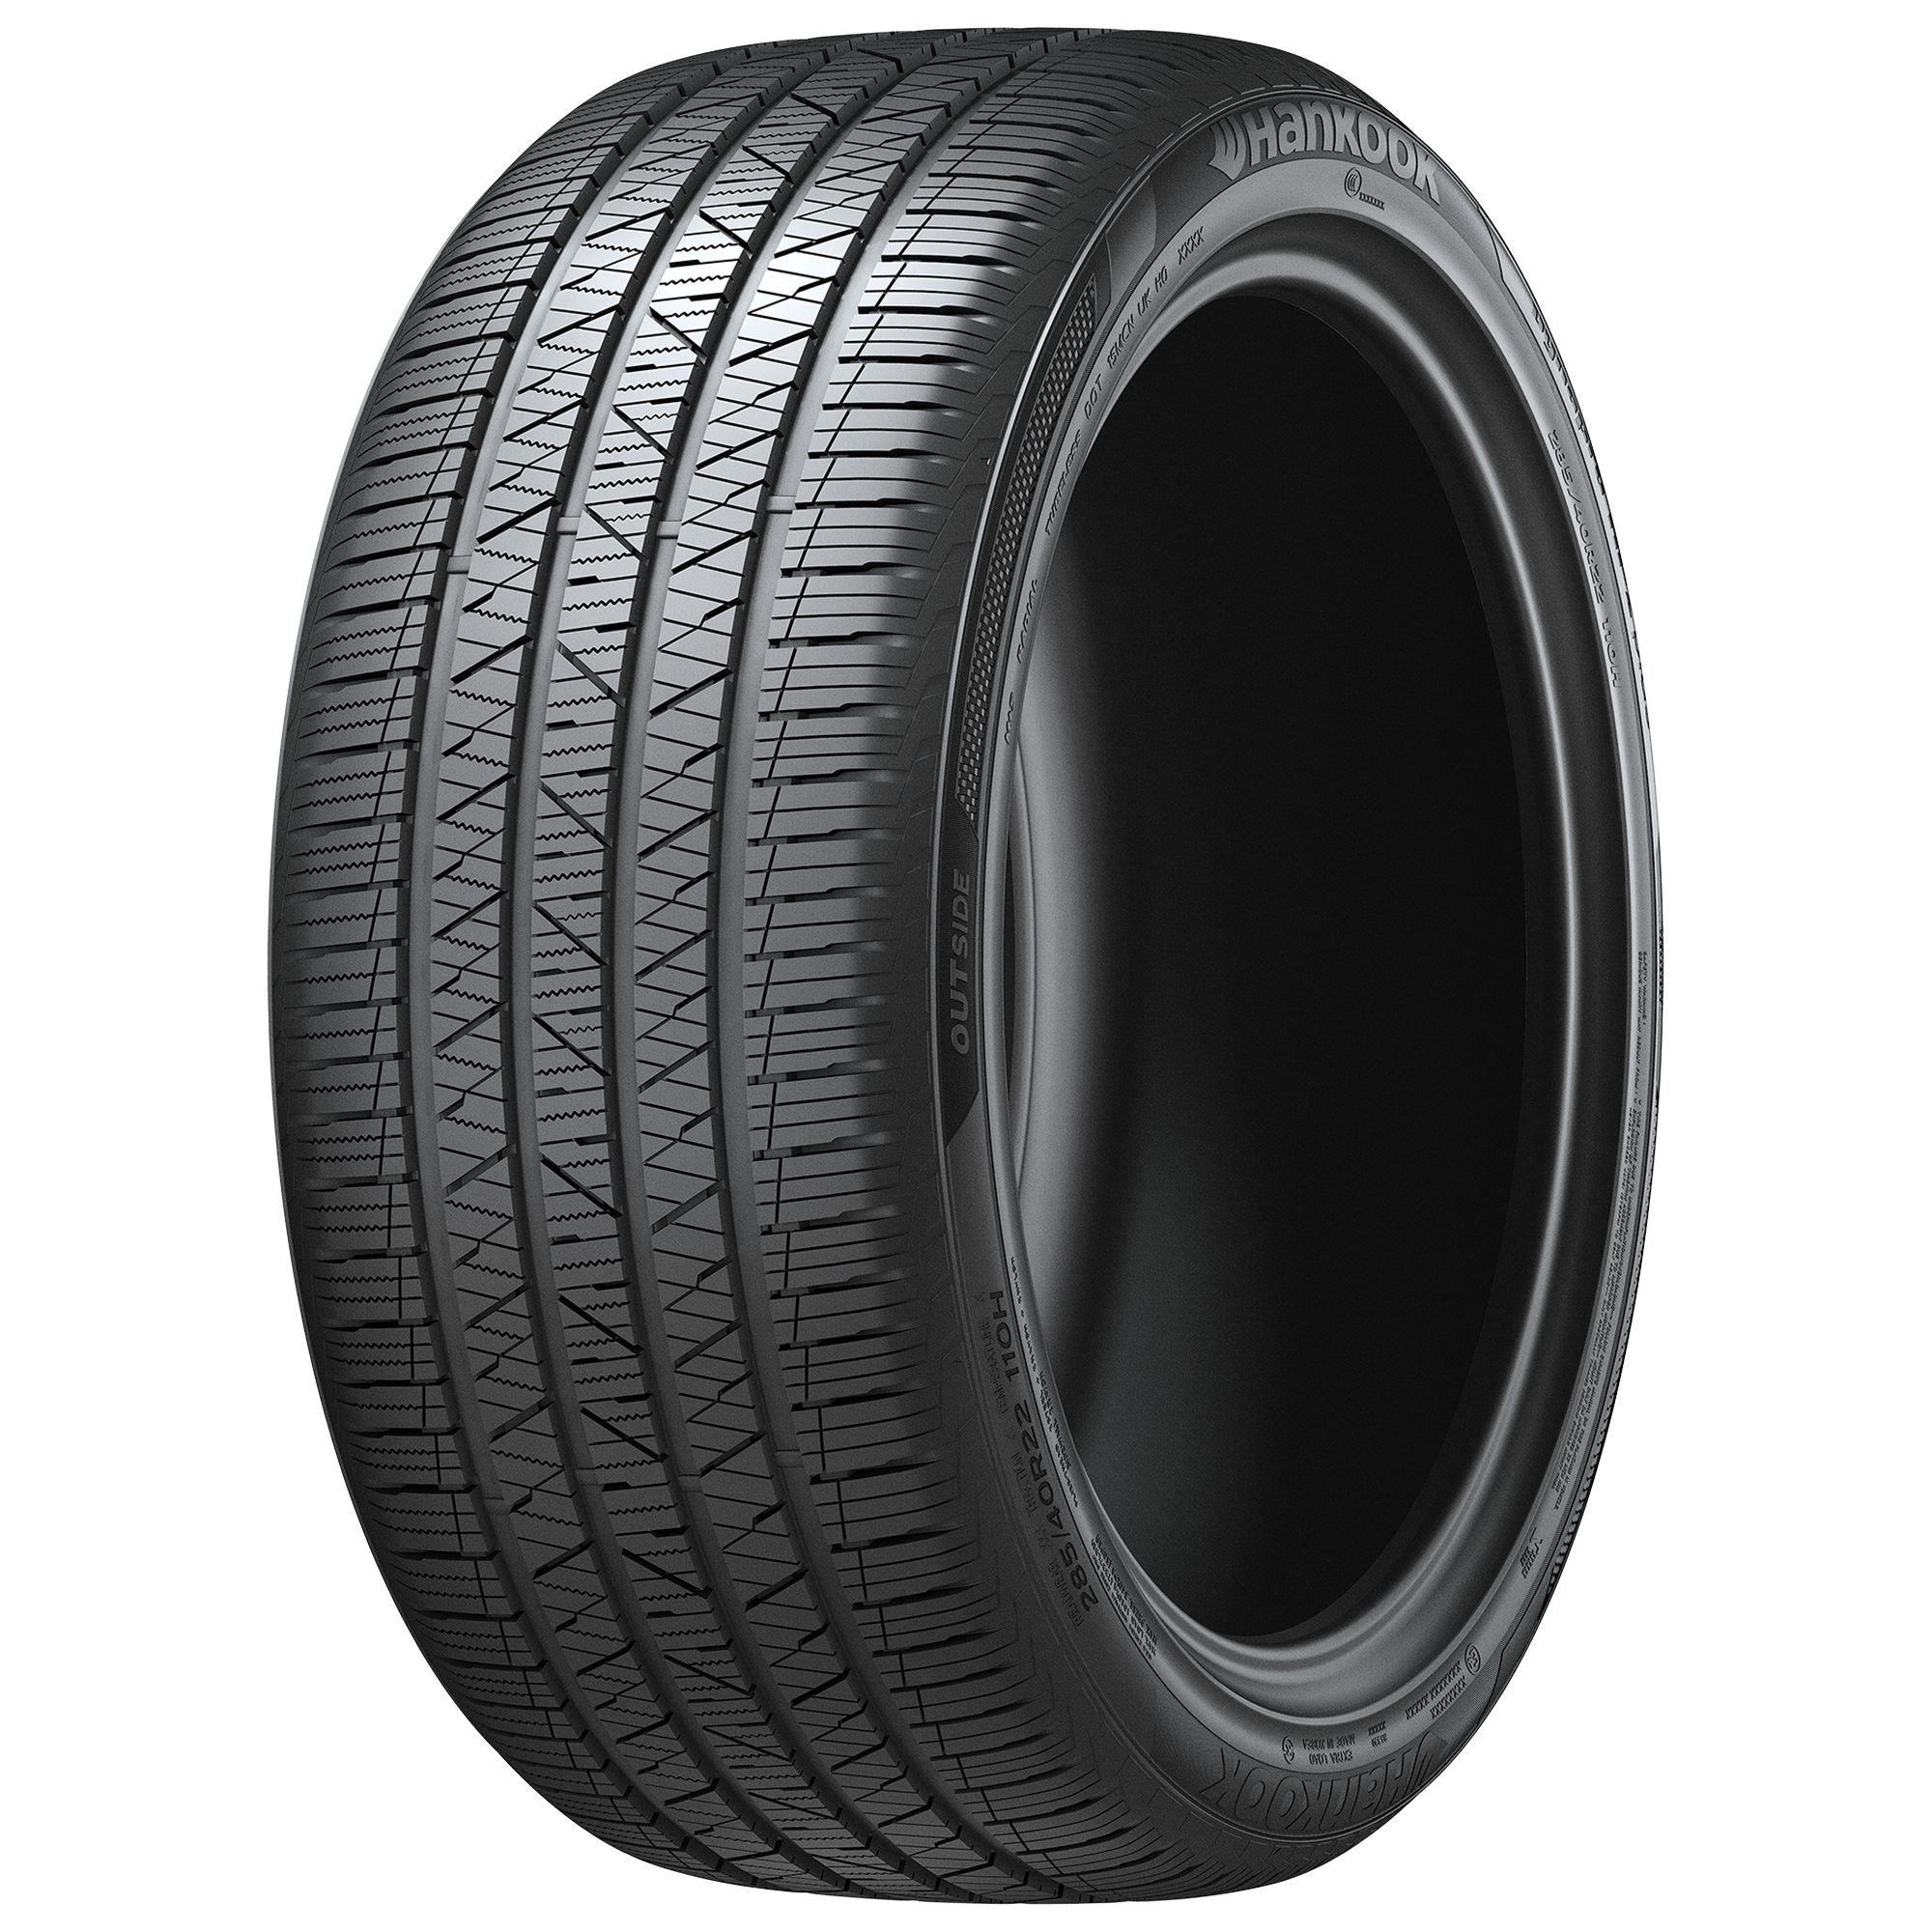 HANKOOK DYNAPRO HP2 PLUS (RA33D) (AO) 285/45R21 113H SOUND ABSORBER